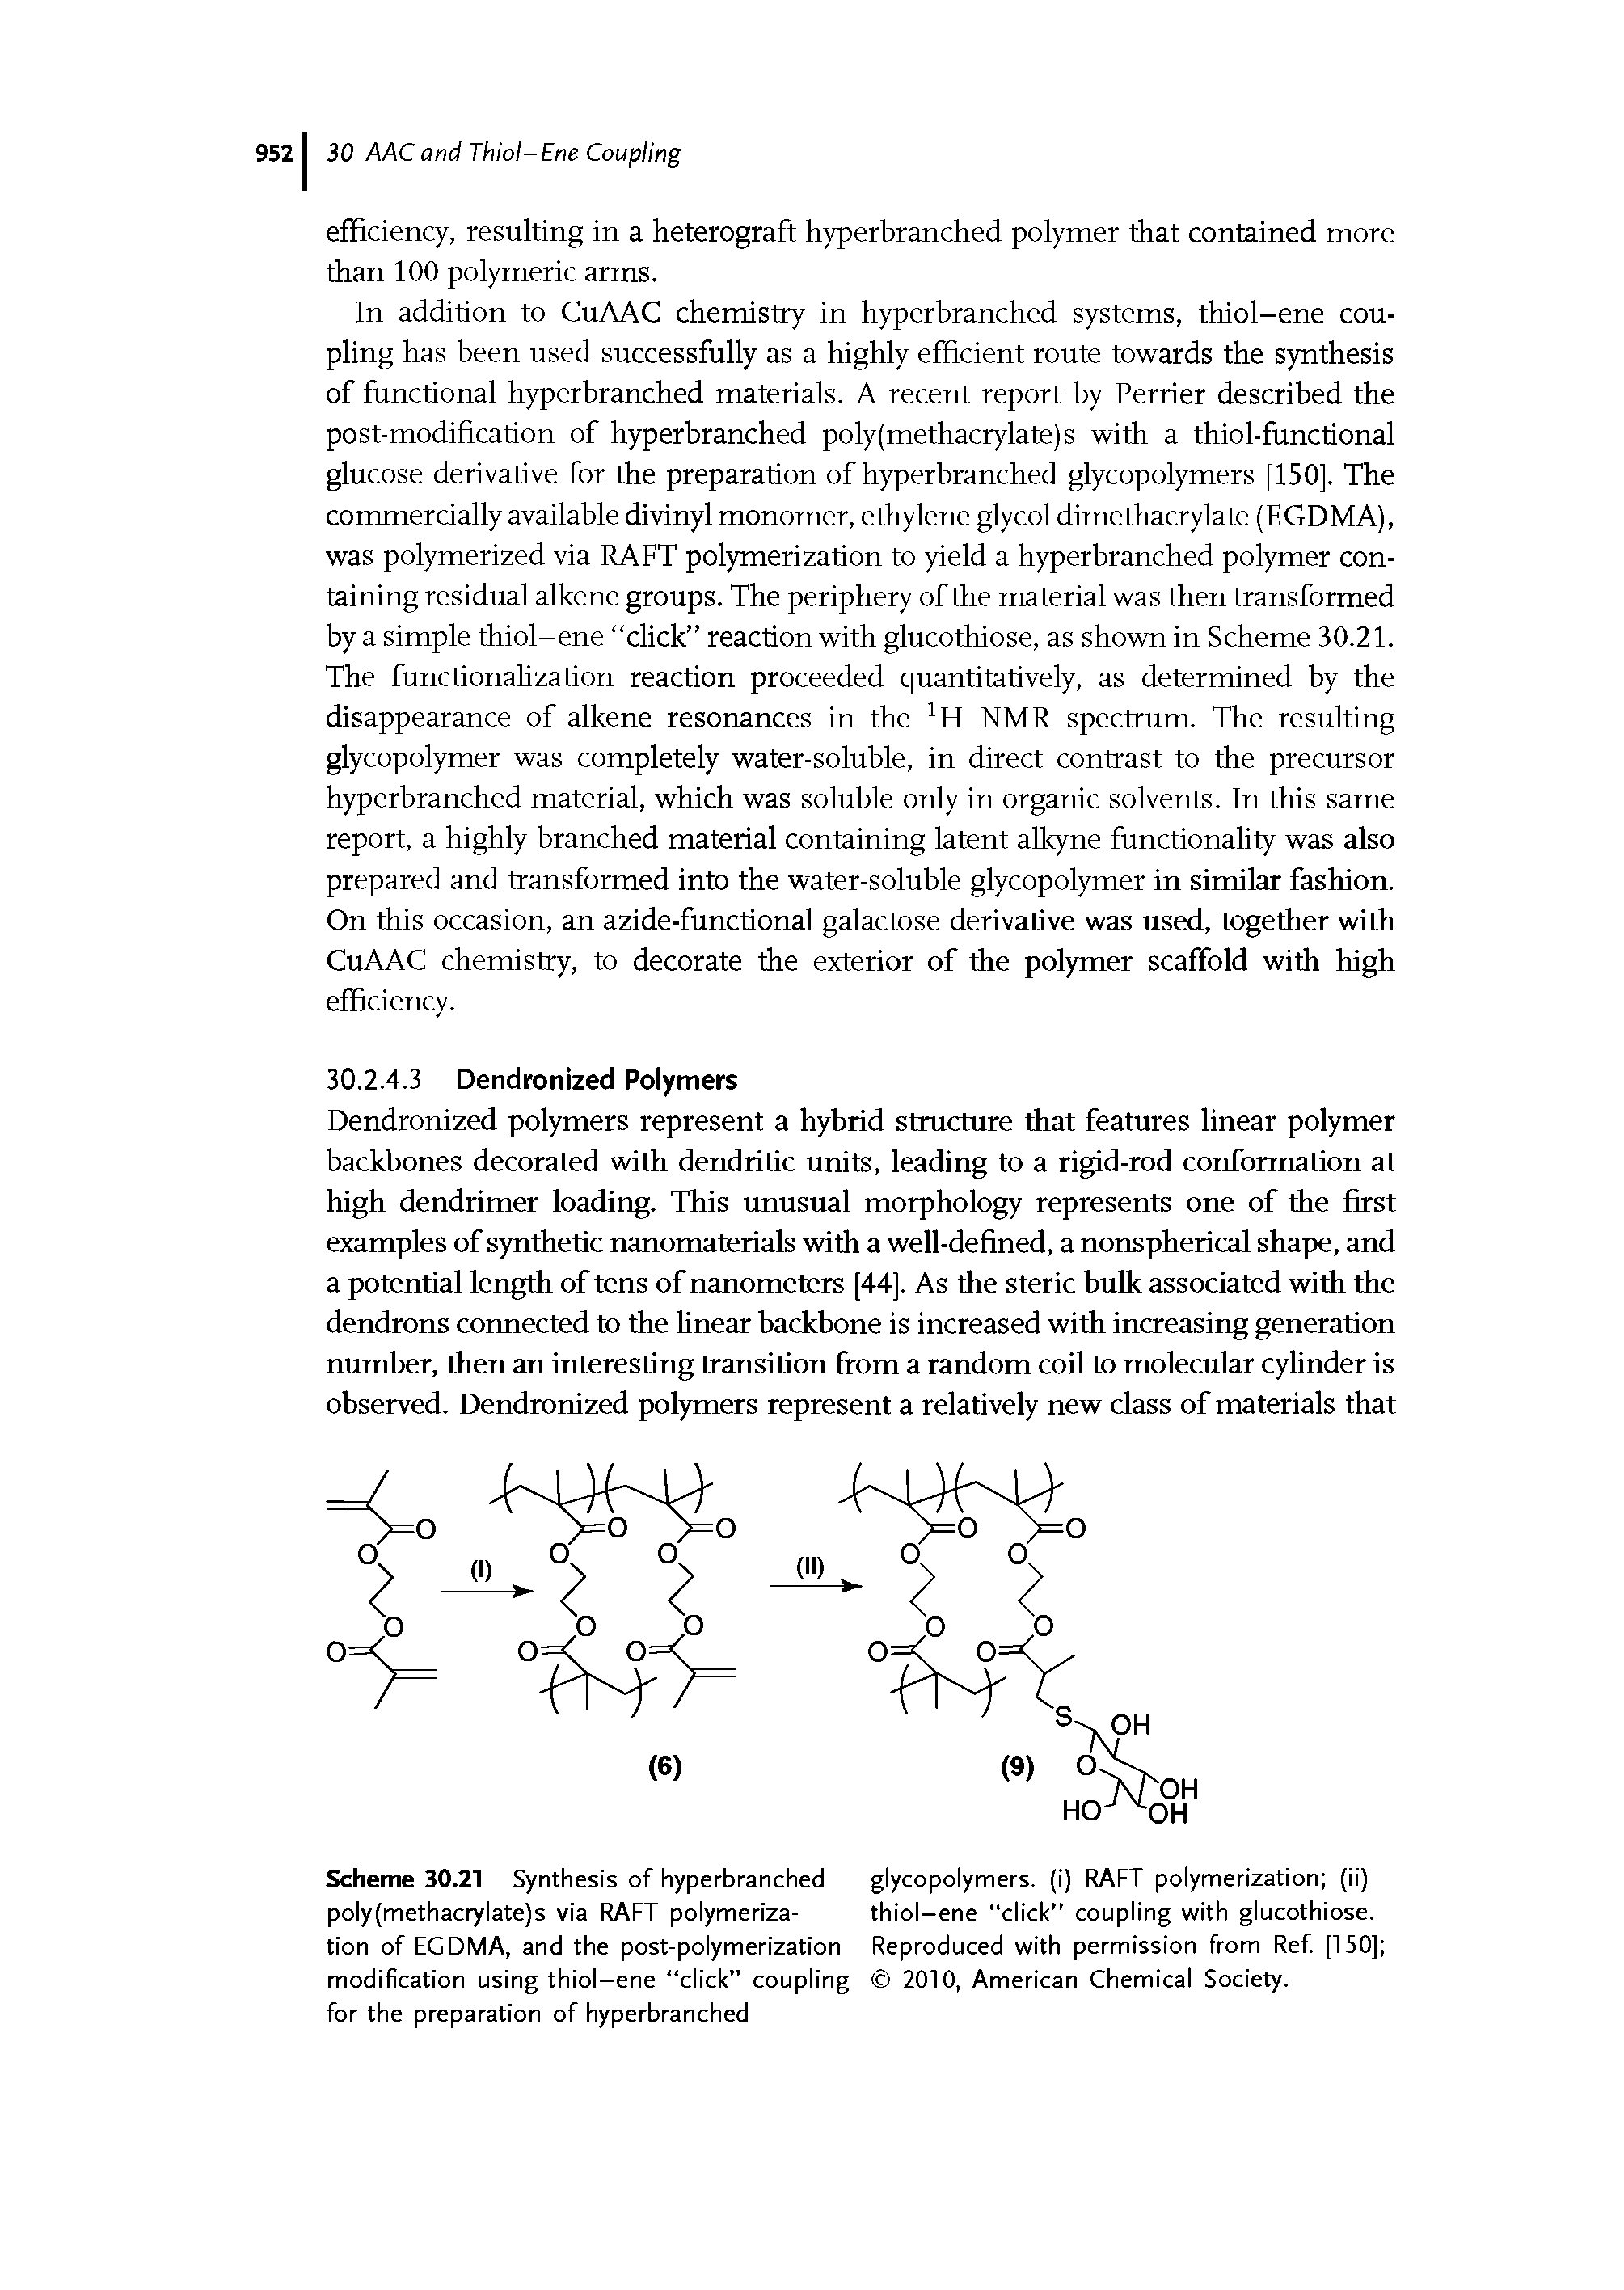 Scheme 30.21 Synthesis of hyperbranched glycopolymers. (i) RAFT polymerization (ii) poly(methacrylate)s via RAFT polymeriza- thiol-ene click" coupling with glucothiose. tion of EGDMA, and the post-polymerization Reproduced with permission from Ref. [ISO] modification using thiol-ene click coupling 2010, American Chemical Society, for the preparation of hyperbranched...